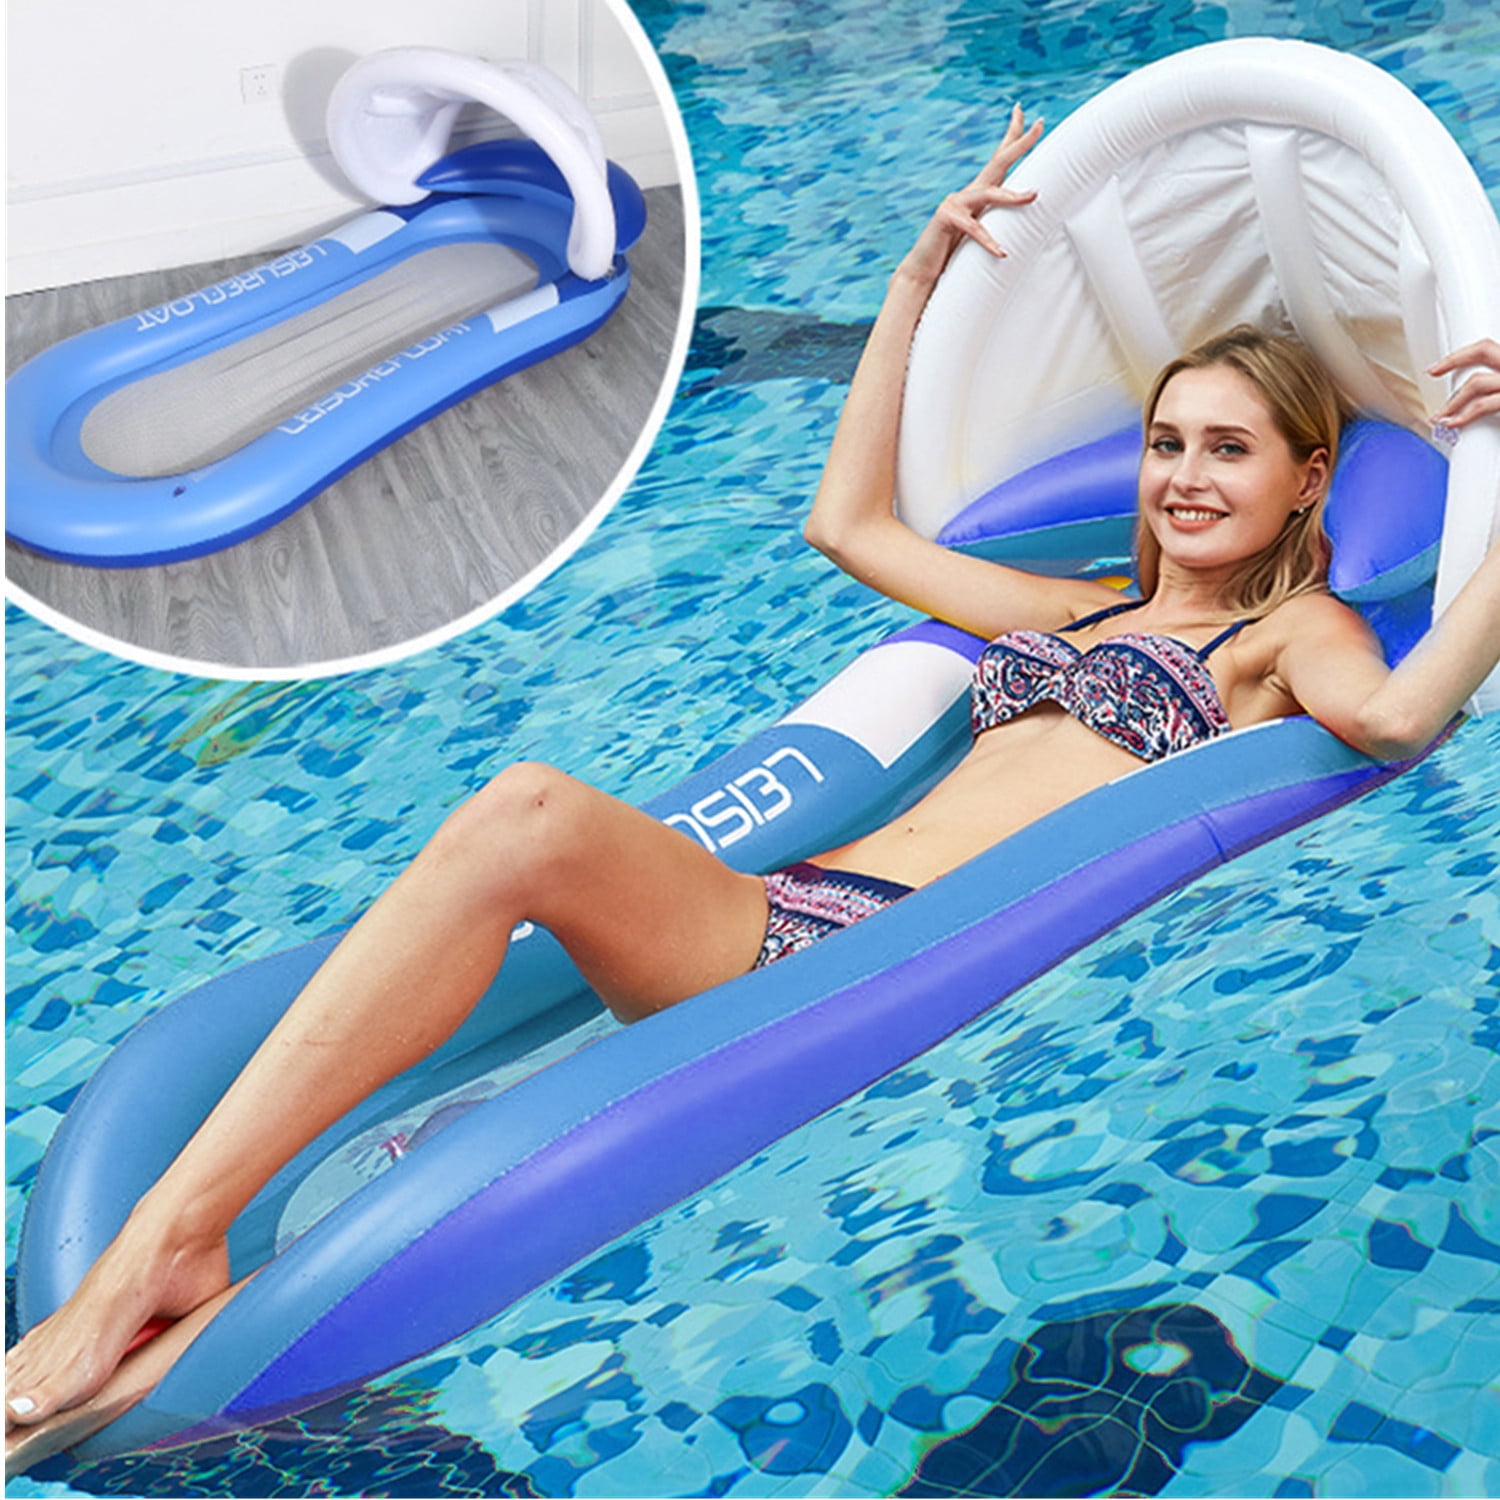 INFLATABLE Lounger Sun Tanning Mattress Bed Pillow Beach Pool Float Lilo Lounge 